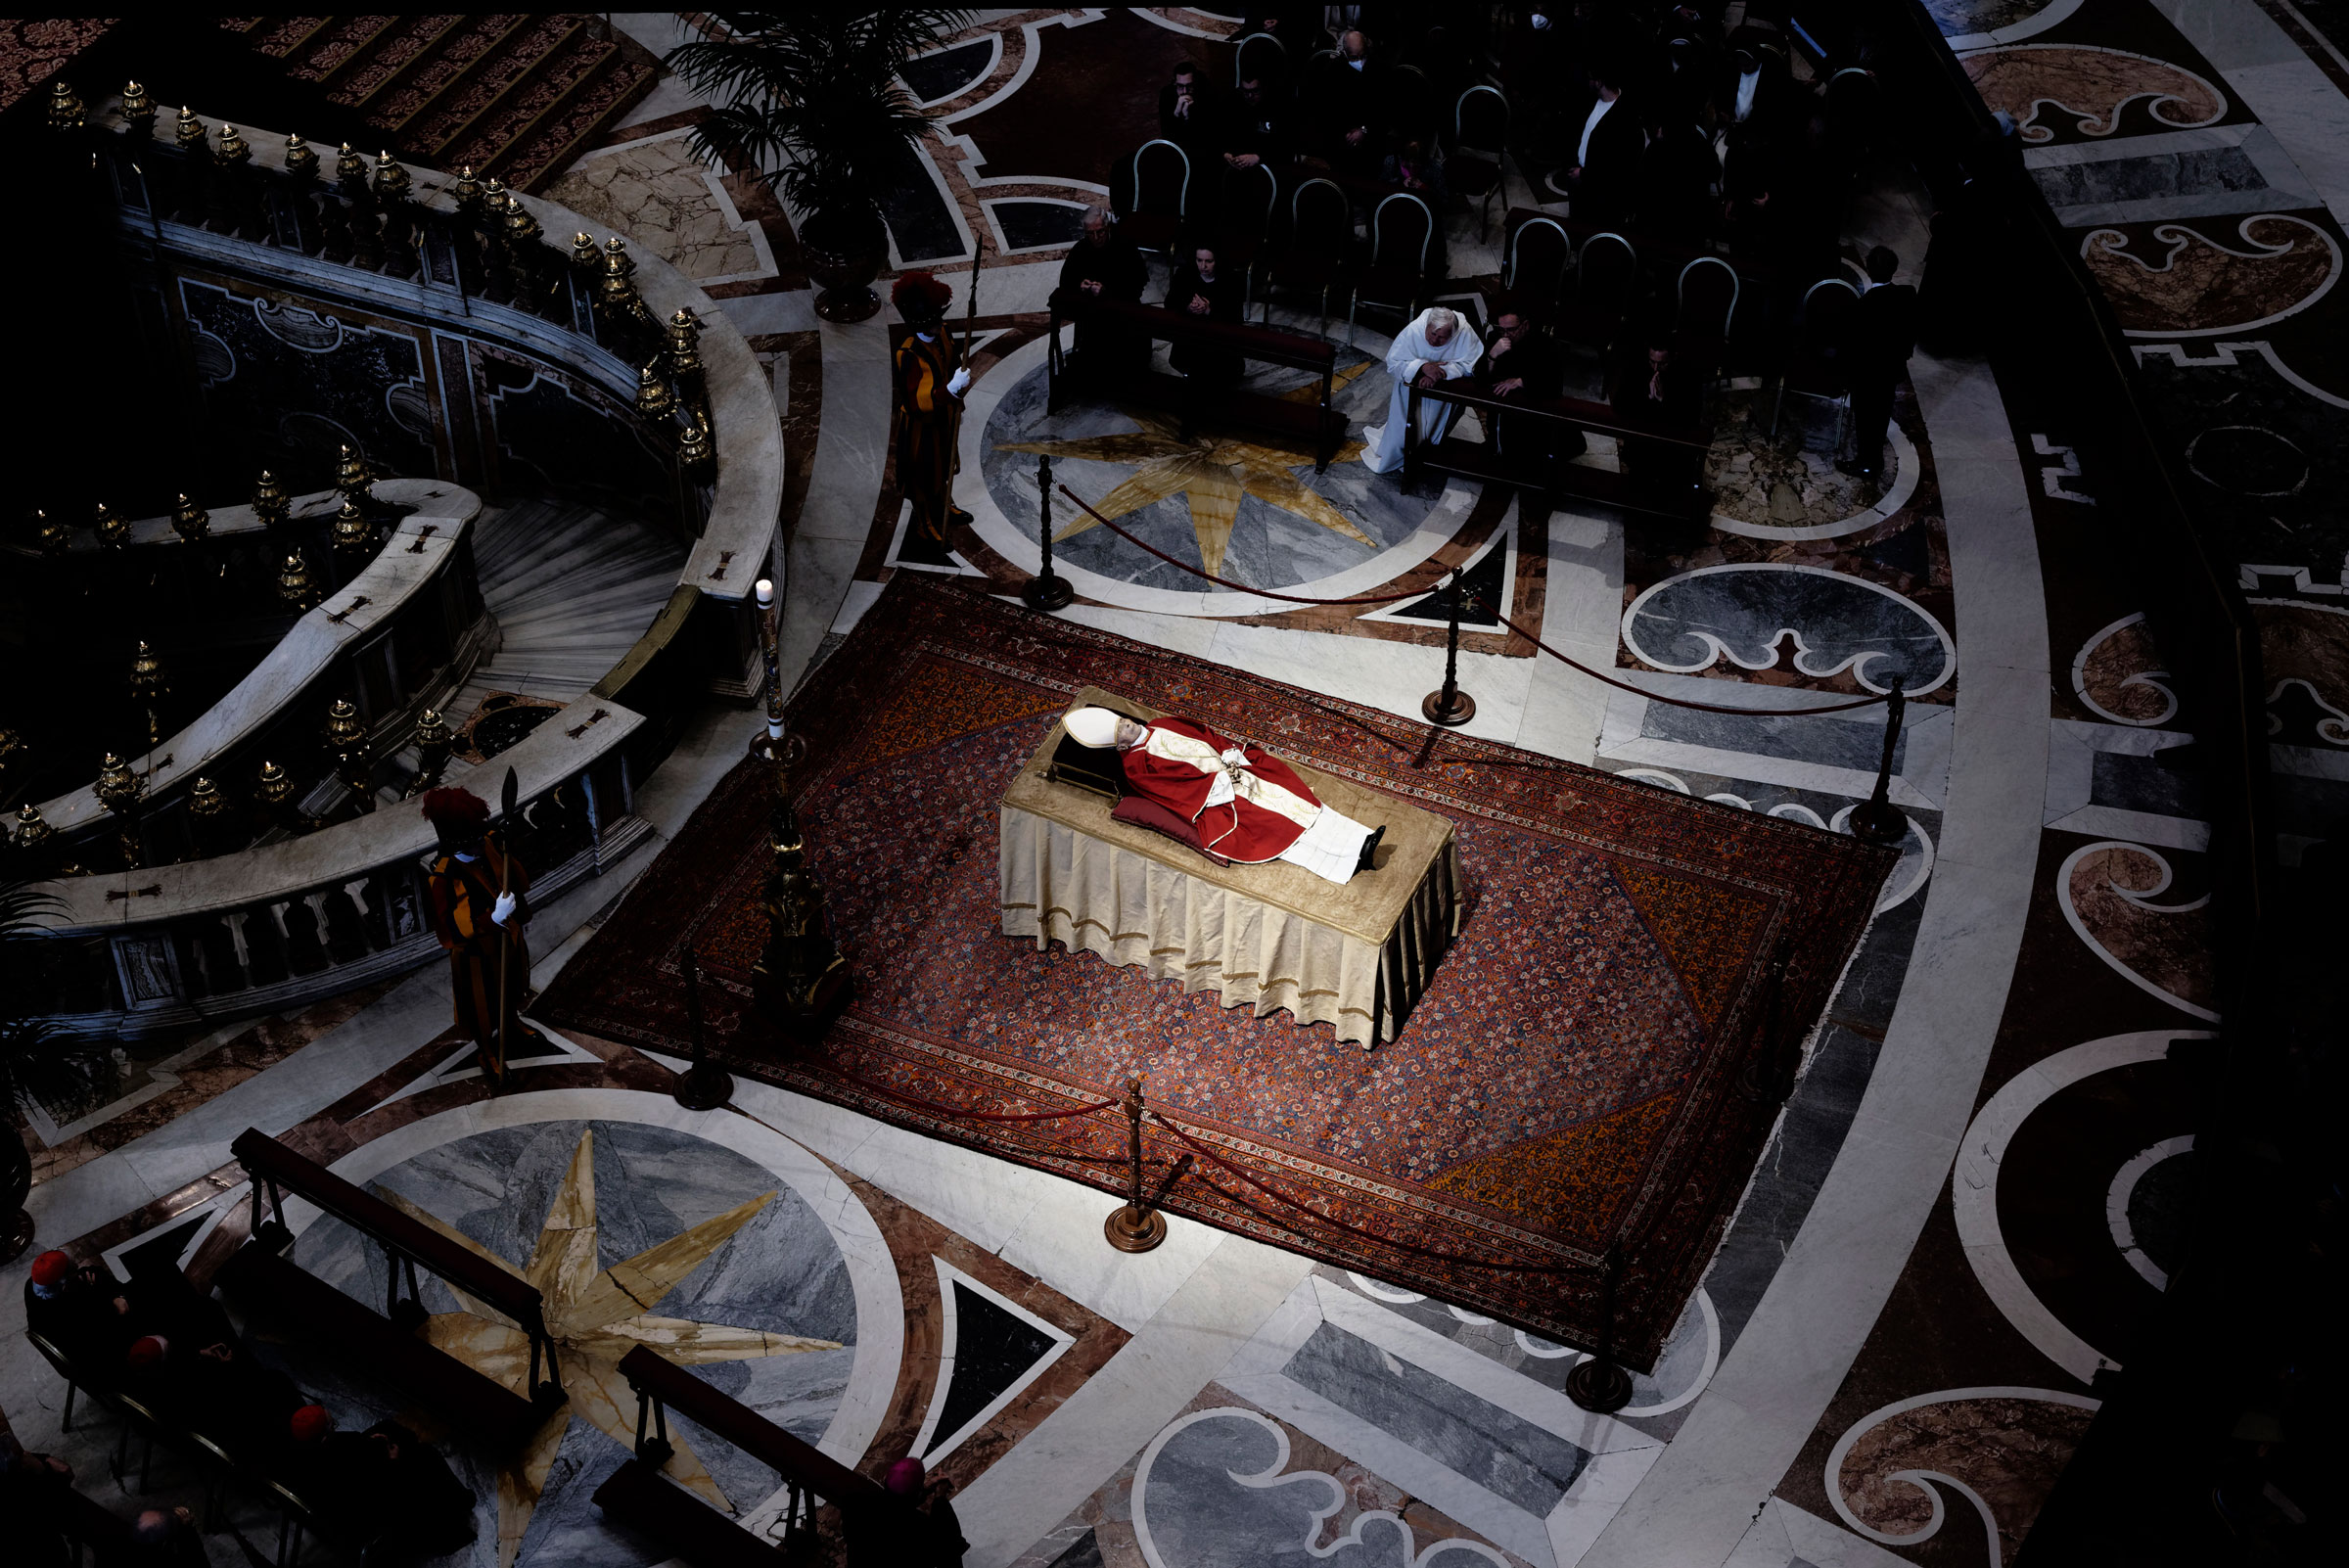 The body of Pope Emeritus Benedict XVI lies in state at St. Peter’s Basilica on Jan. 4, 2023 in Vatican City.